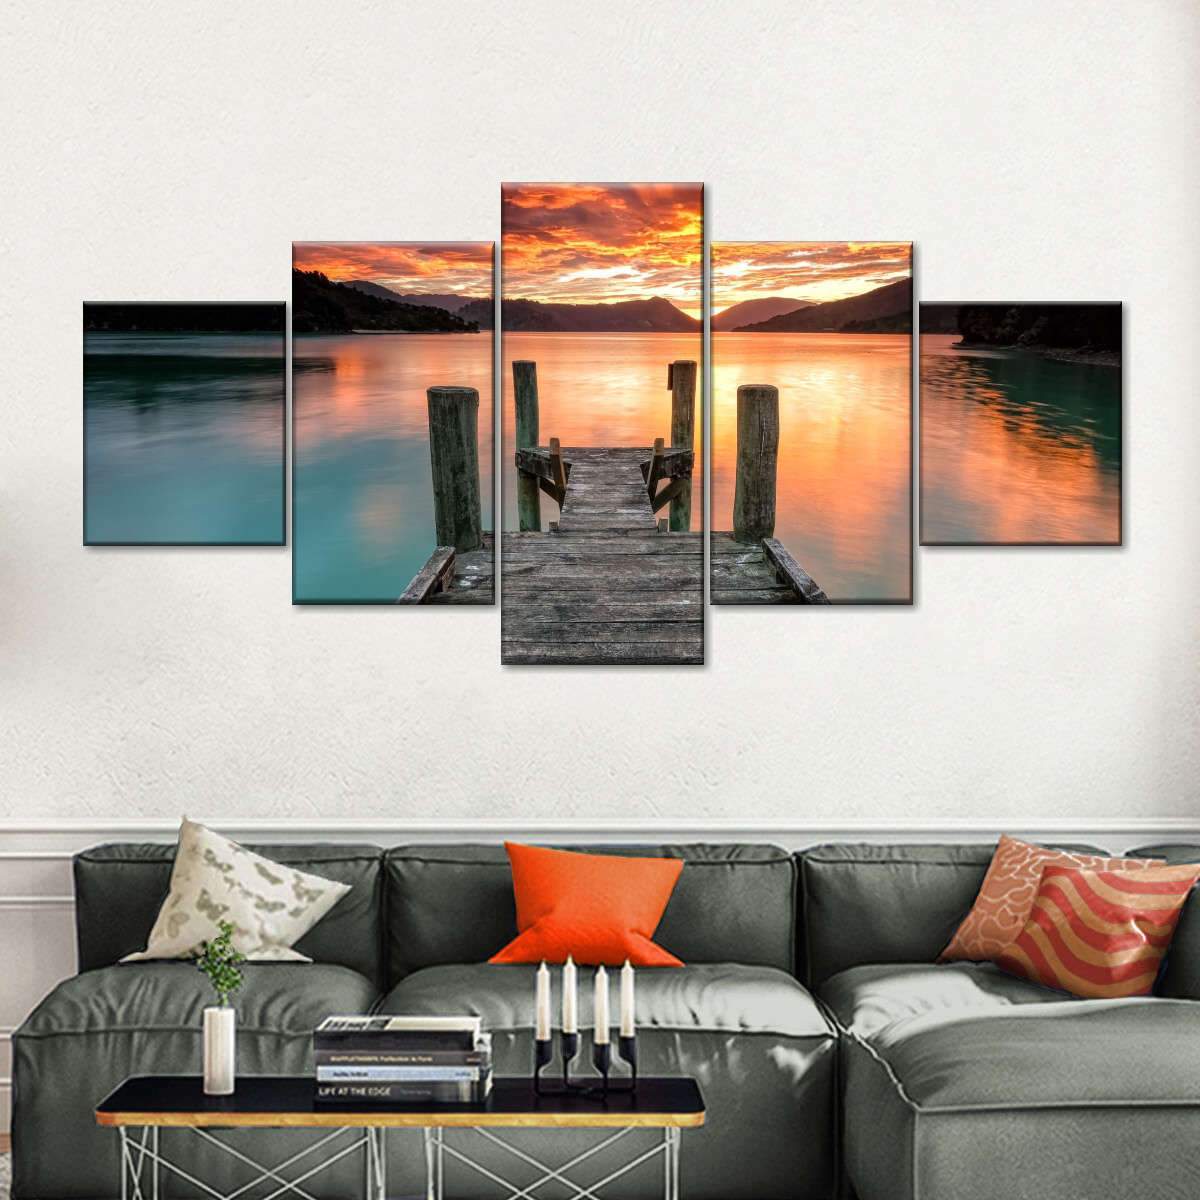 Movie Wall Decor in Canvas, Murals, Tapestries, Posters & More